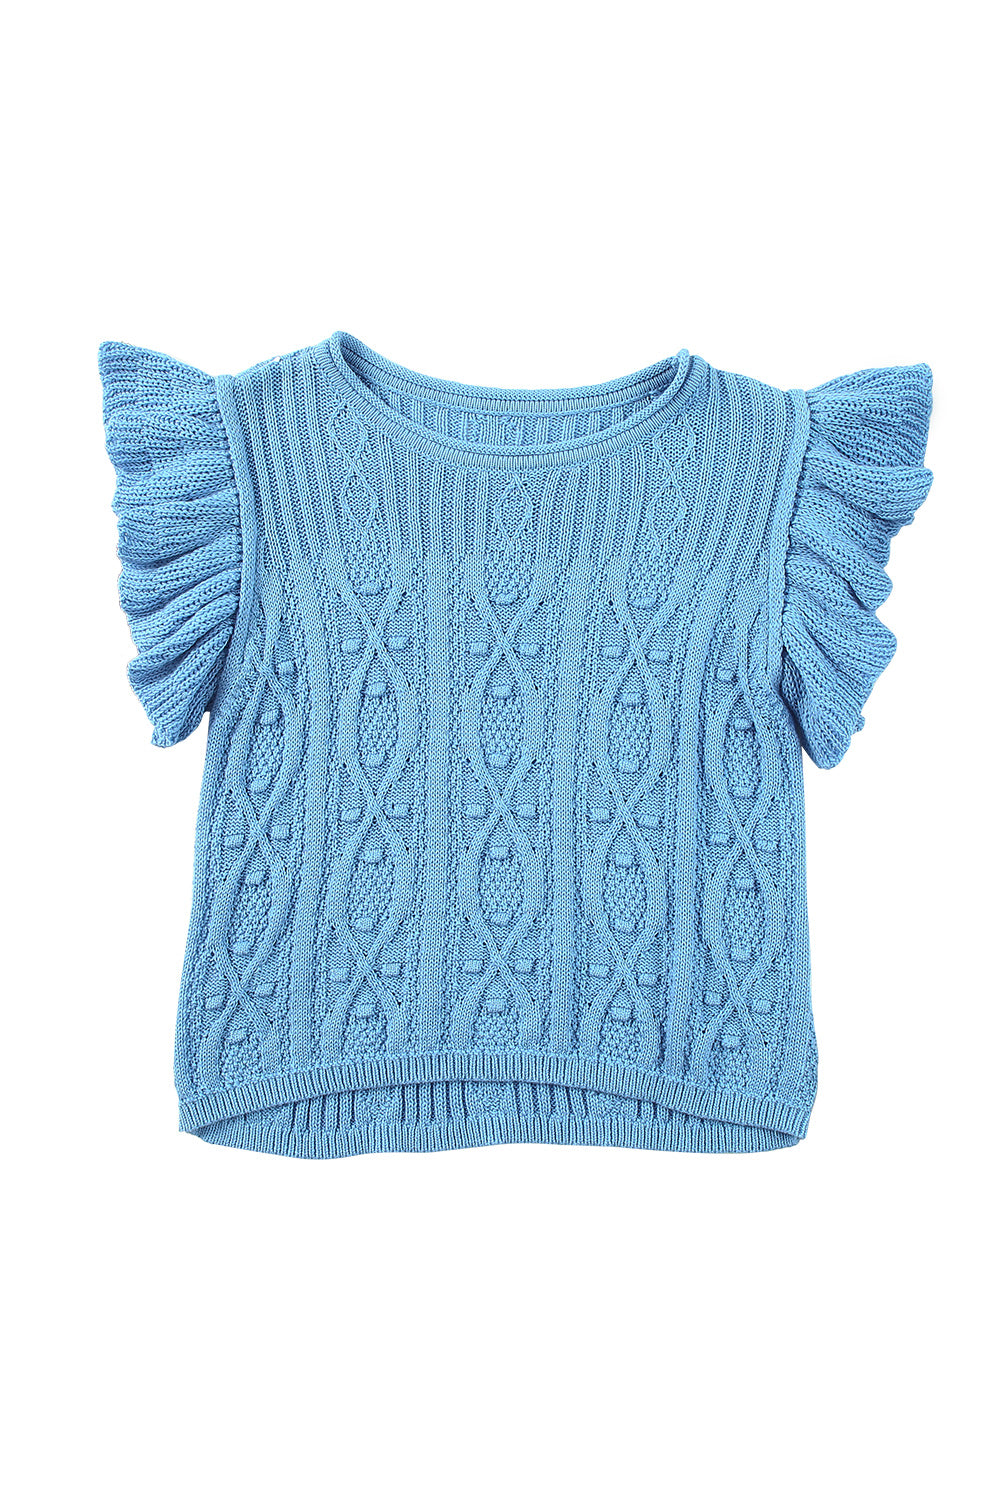 Ruffle Sleeve Cable Knit Sweater